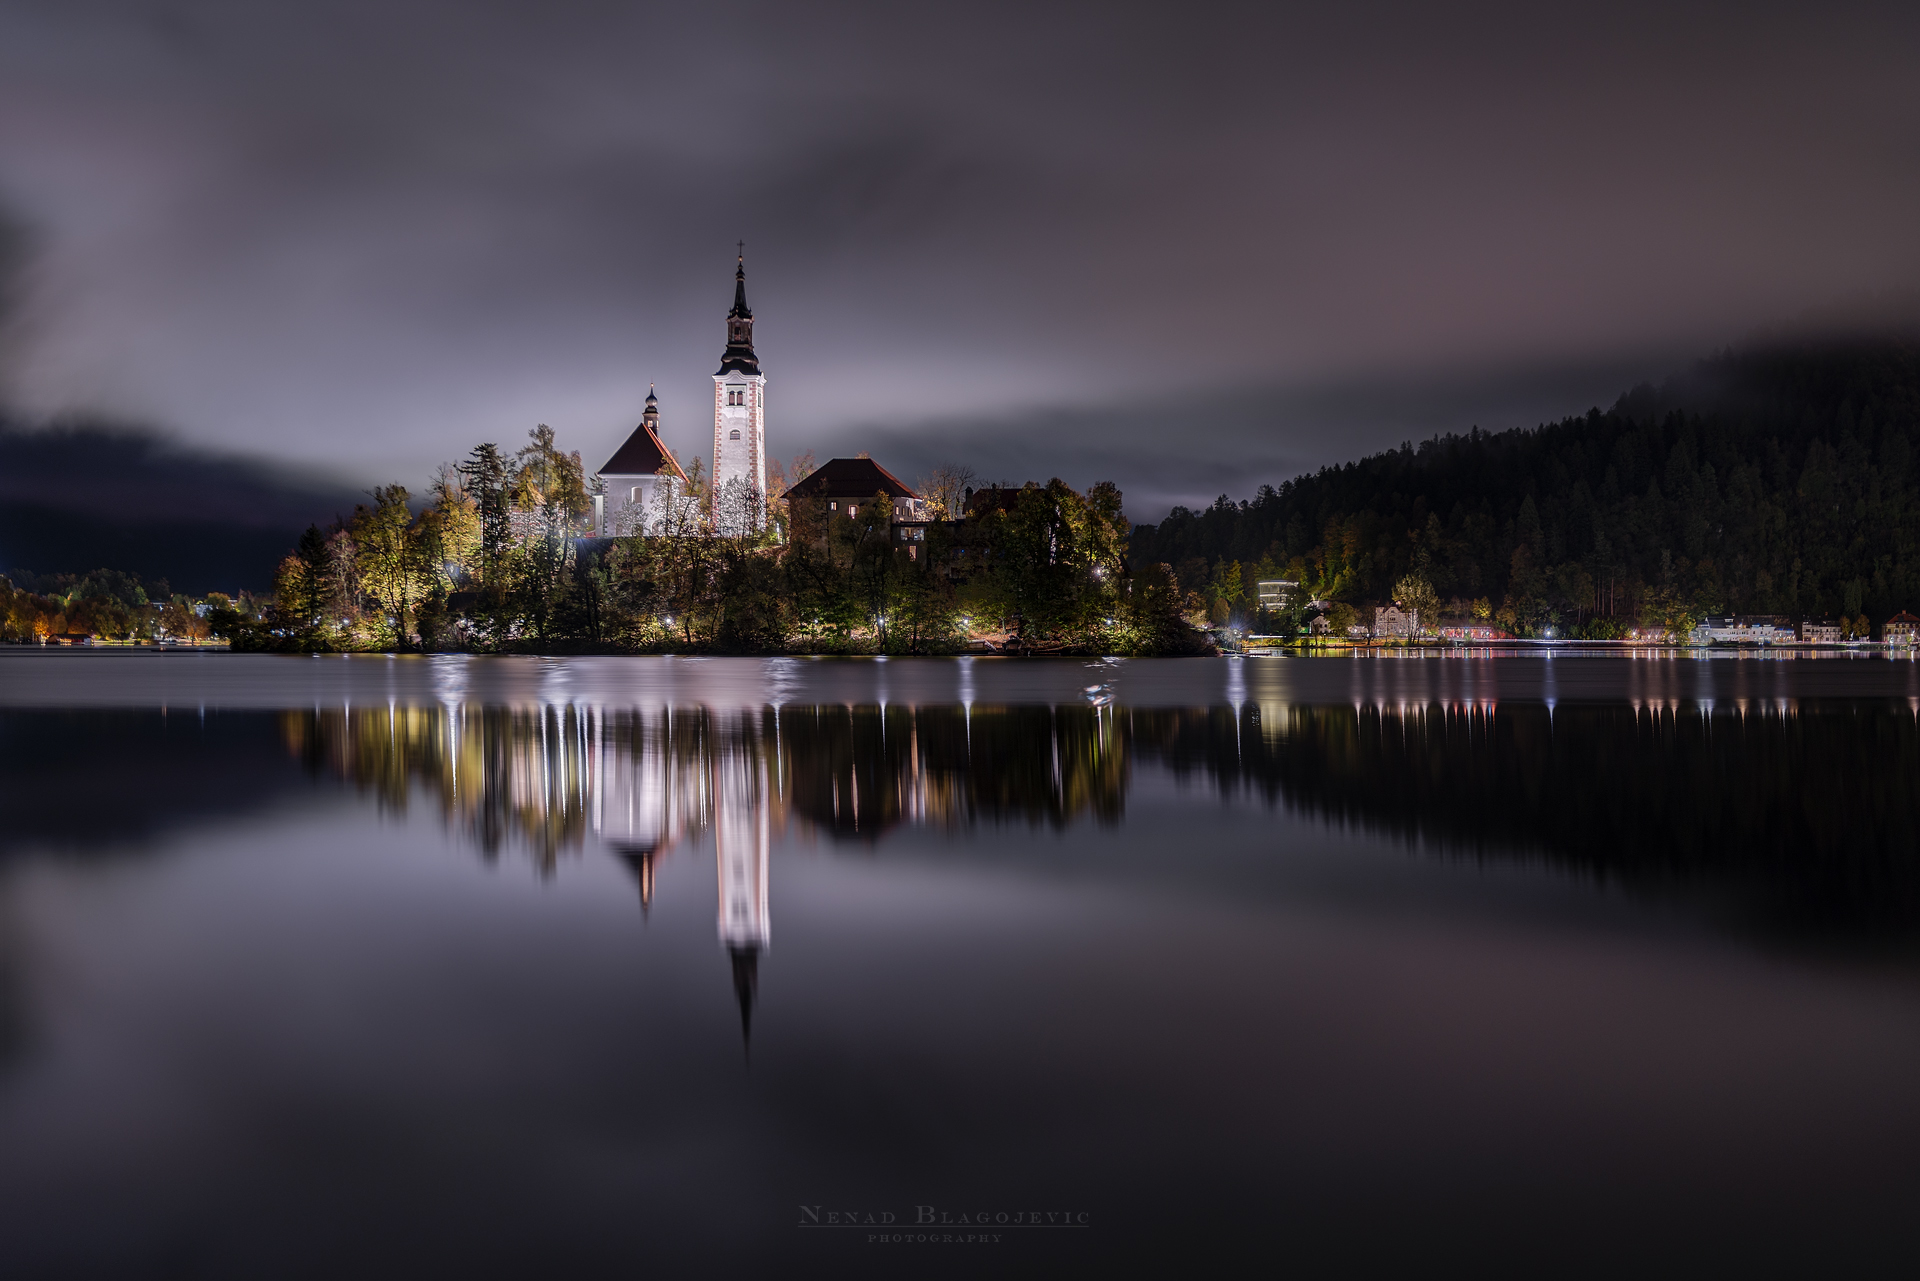 Bled after the rain...